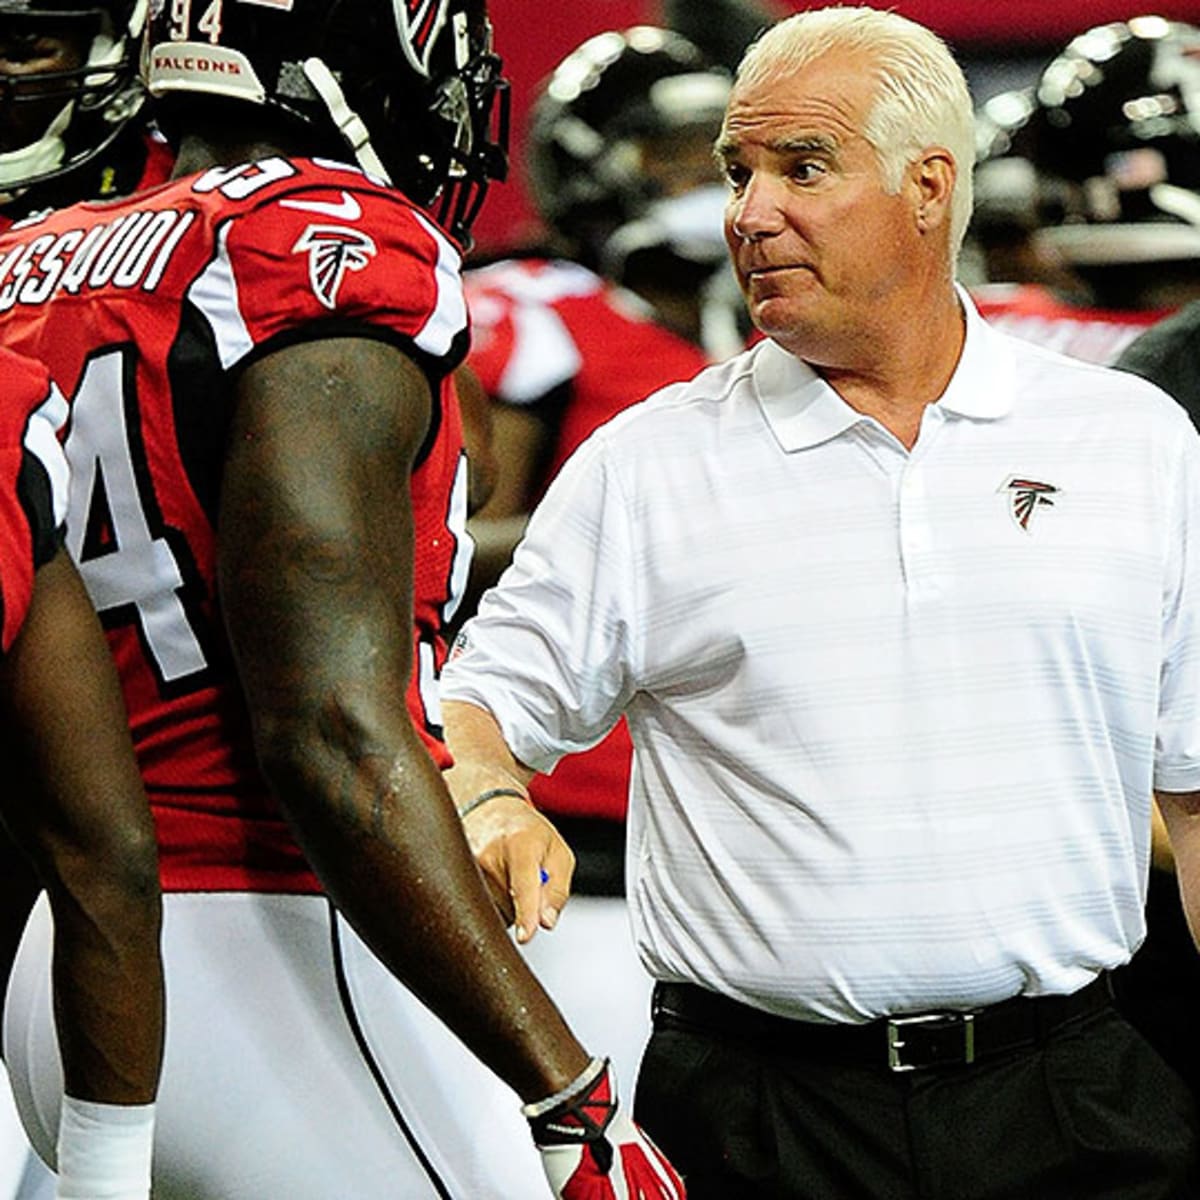 EXCLUSIVE: Rams' disastrous season proves 'f**k them picks' is not  sustainable for long-term success, claims ex-Falcons head coach Mike Smith